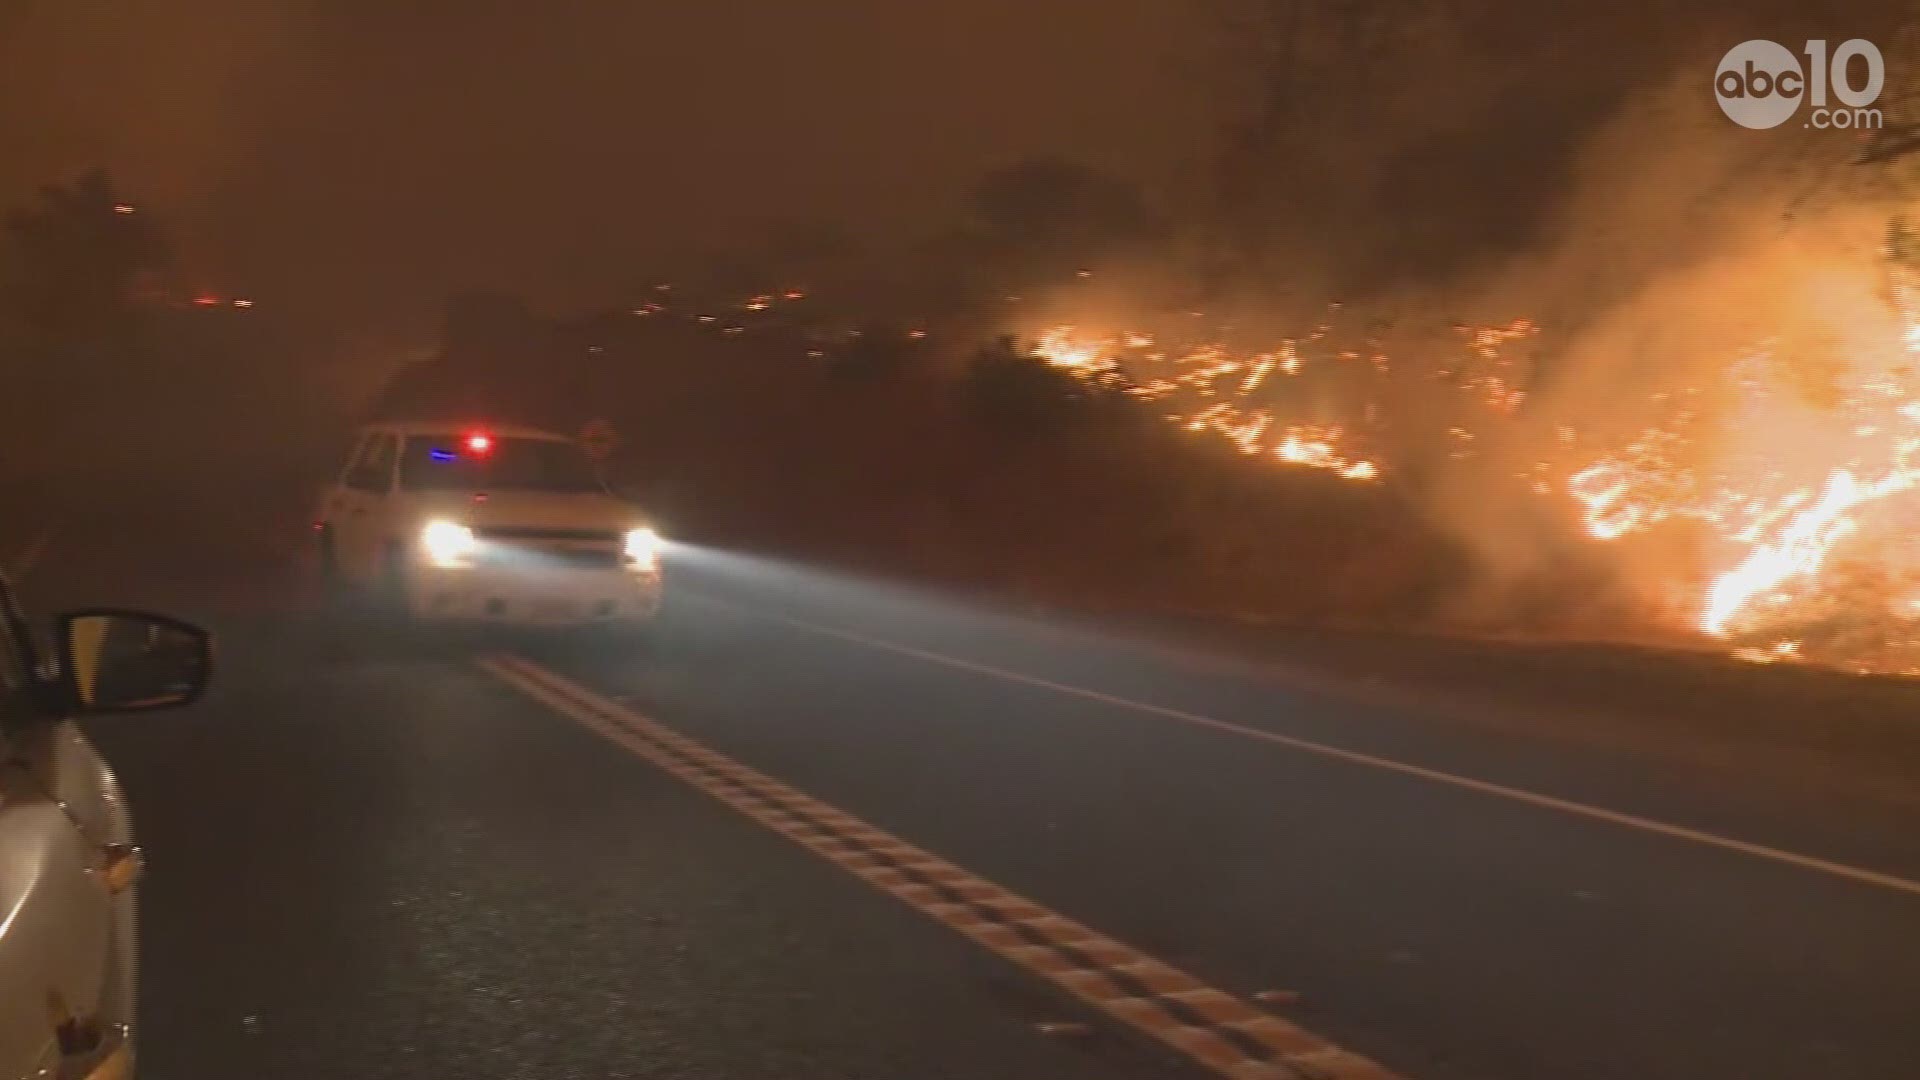 Tens of thousands are fleeing fast-moving Camp Fire, located an hour north of Oroville.